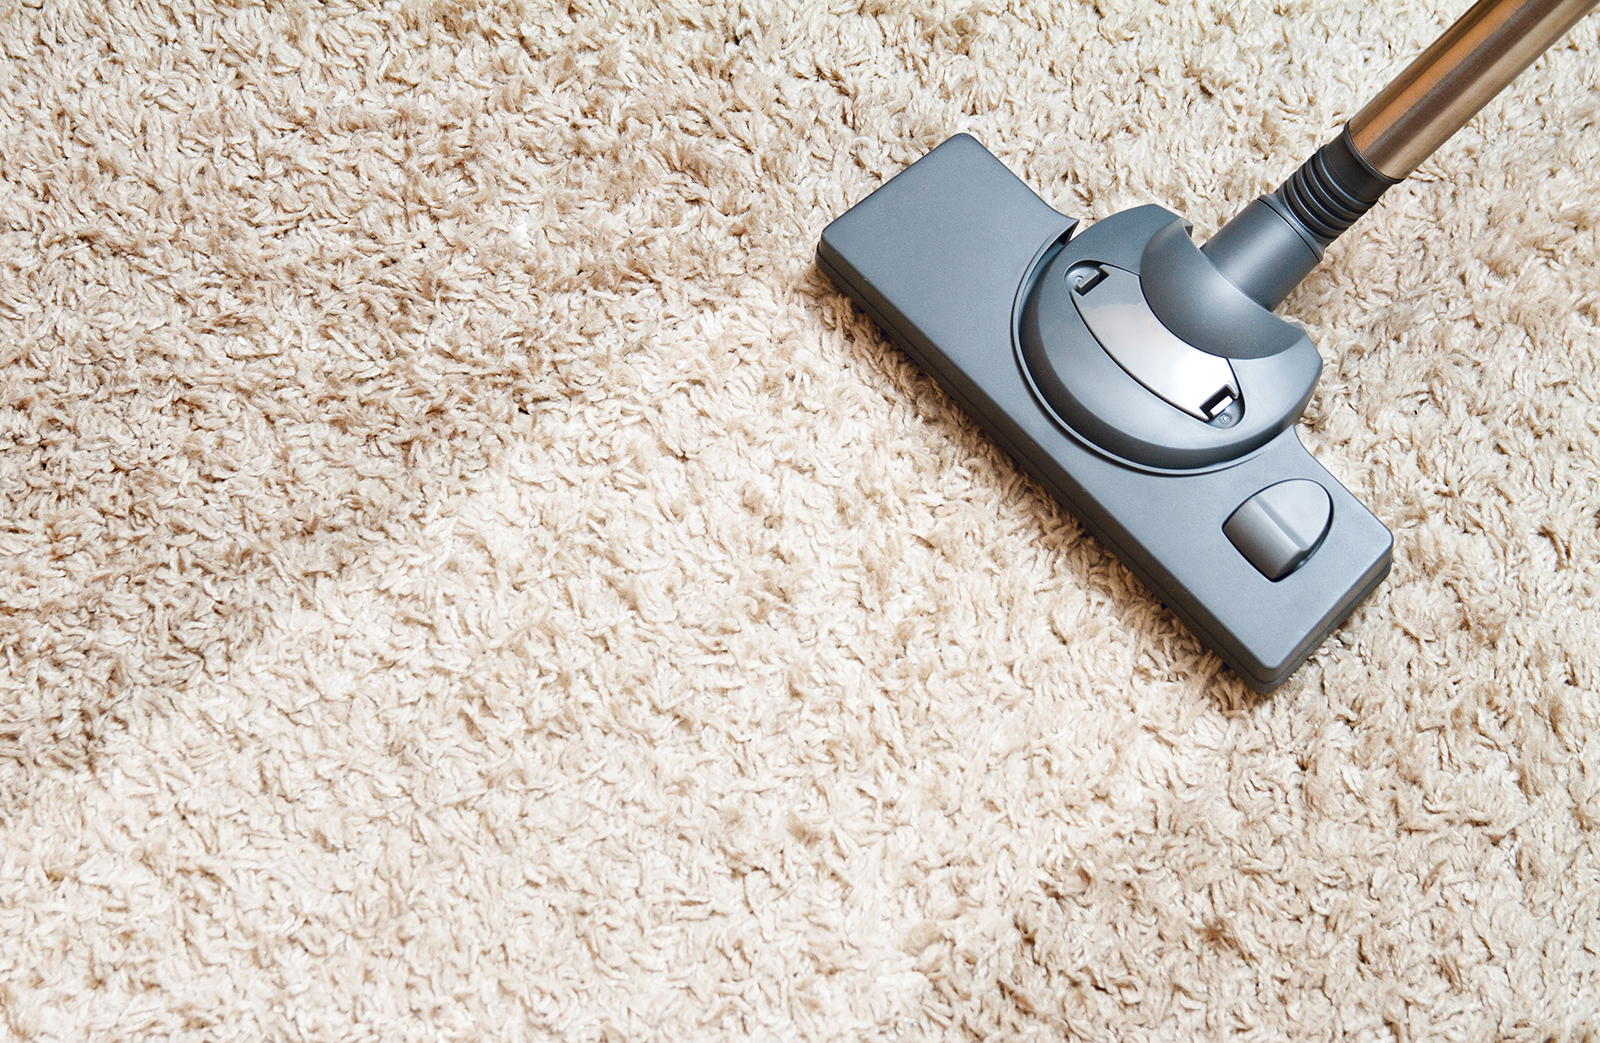 PROFESSIONAL CARPET CLEANING SERVICES FOR PA AND NJ